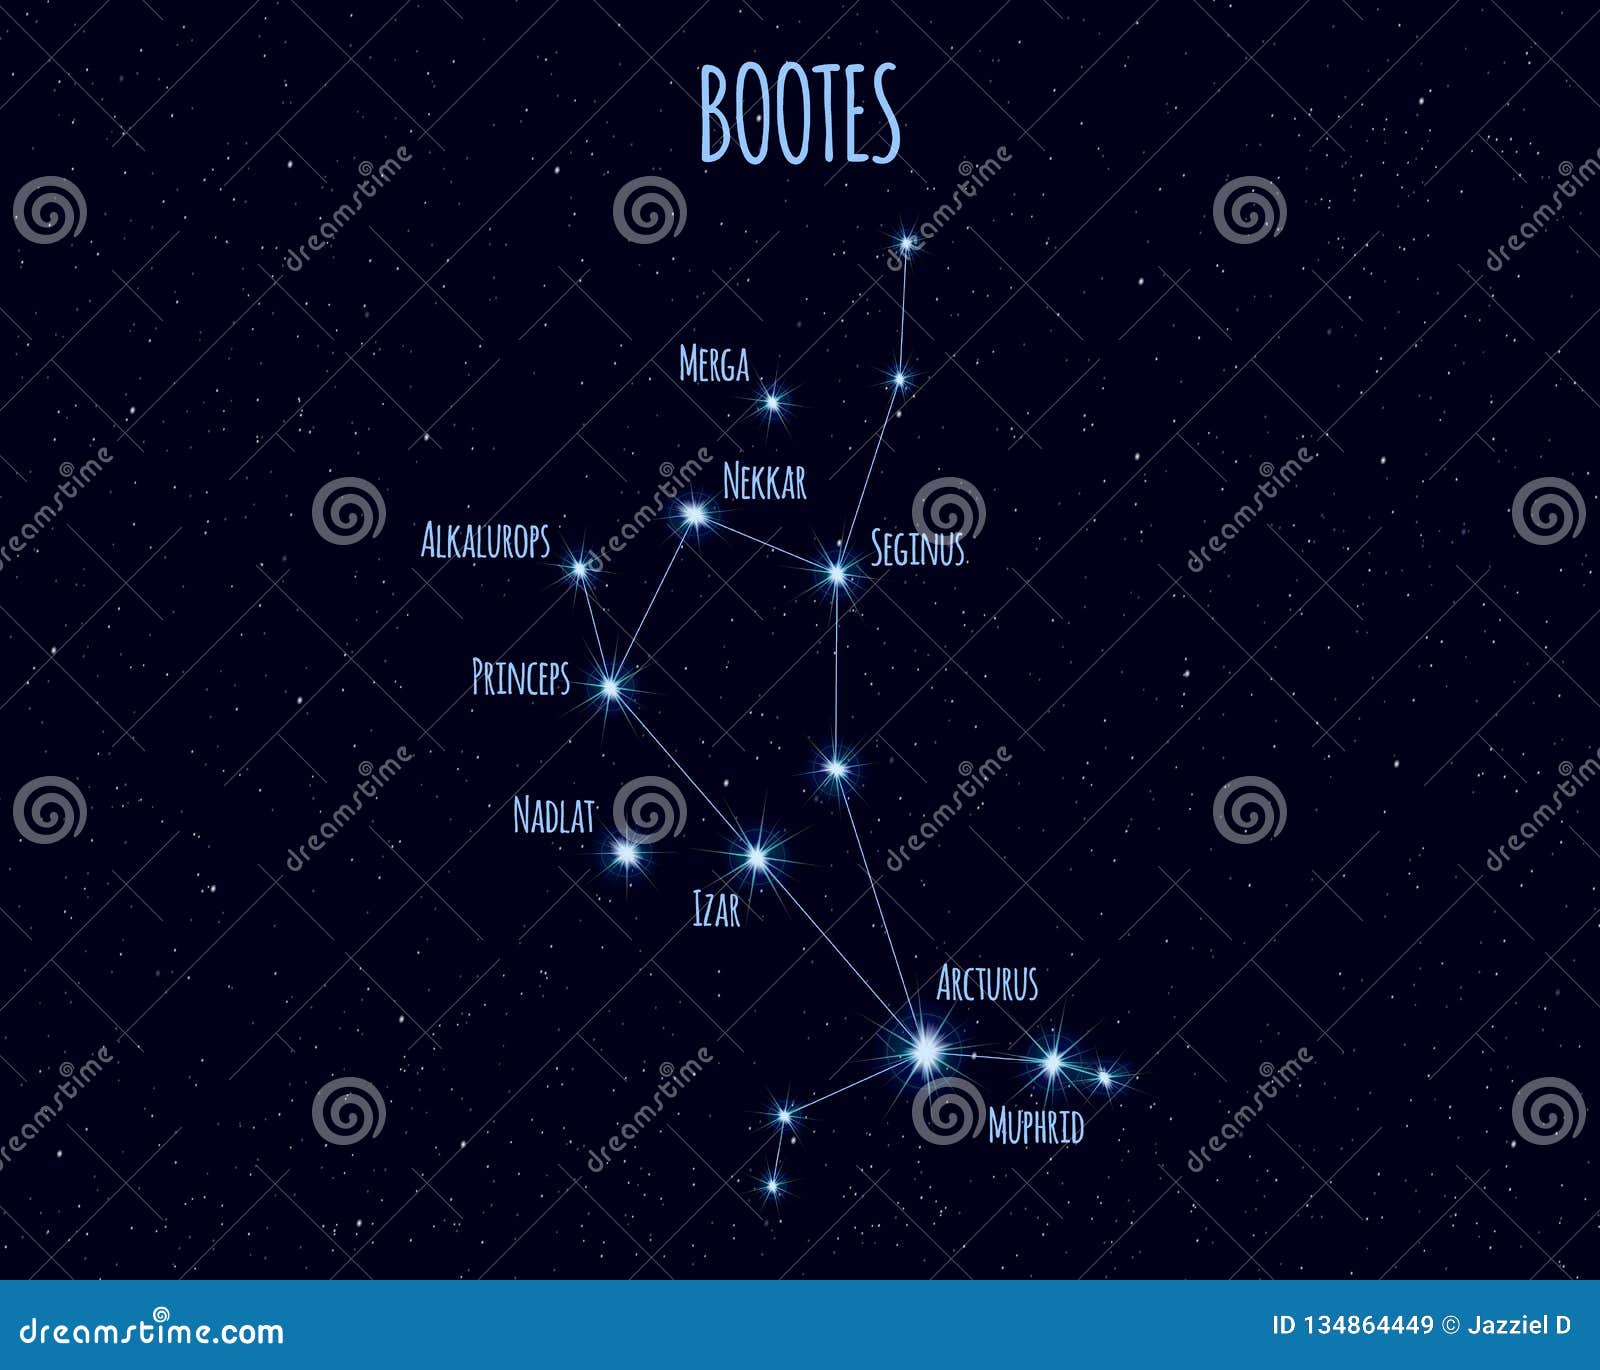 bootes constellation,   with the names of basic stars